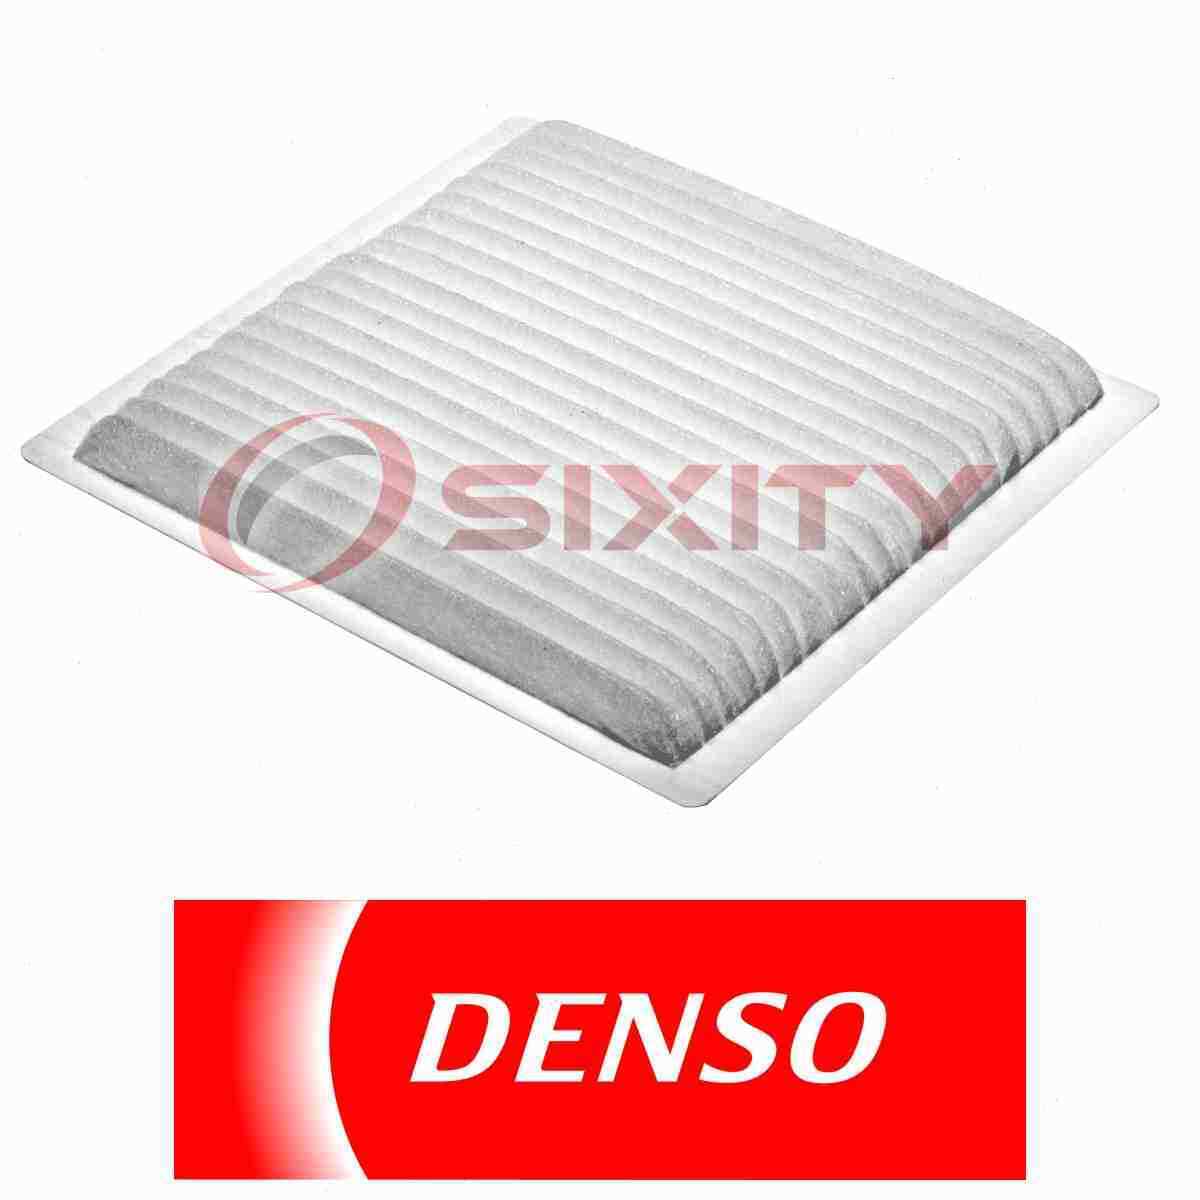 For Lexus RX300 DENSO Cabin Air Filter 3.0L V6 1999-2003 x3